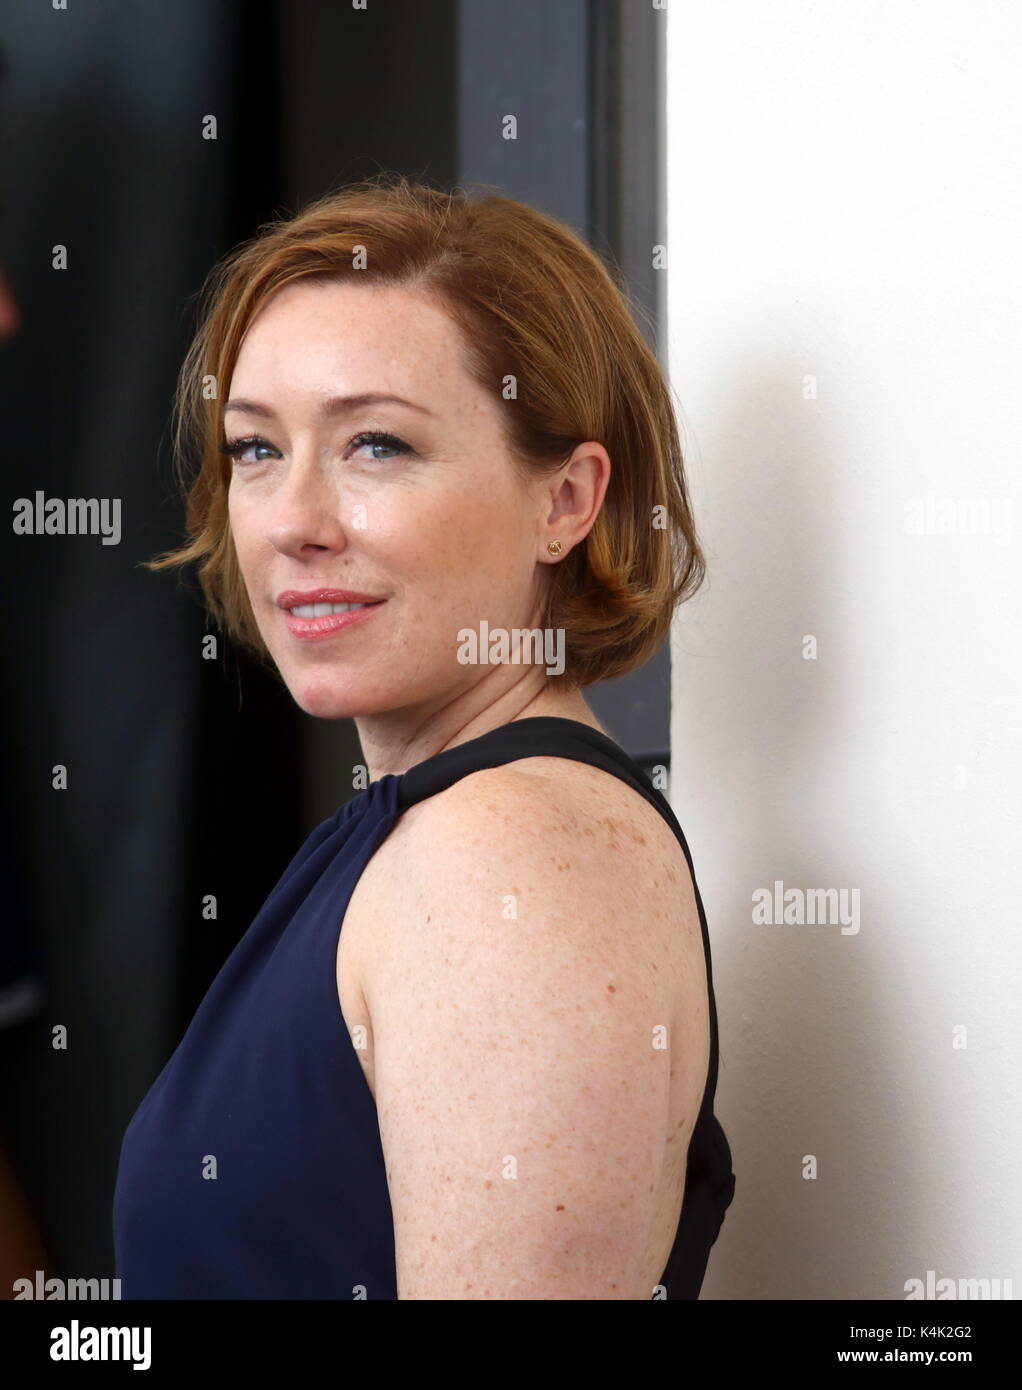 Venice, Italy. 6th September, 2017. Actress Molly Parker poses during the photocall of the movie 'Wormwood' during the 74th Venice International Film Festival at Lido of Venice on 6th September, 2017. Credit: Andrea Spinelli/Alamy Live News Stock Photo